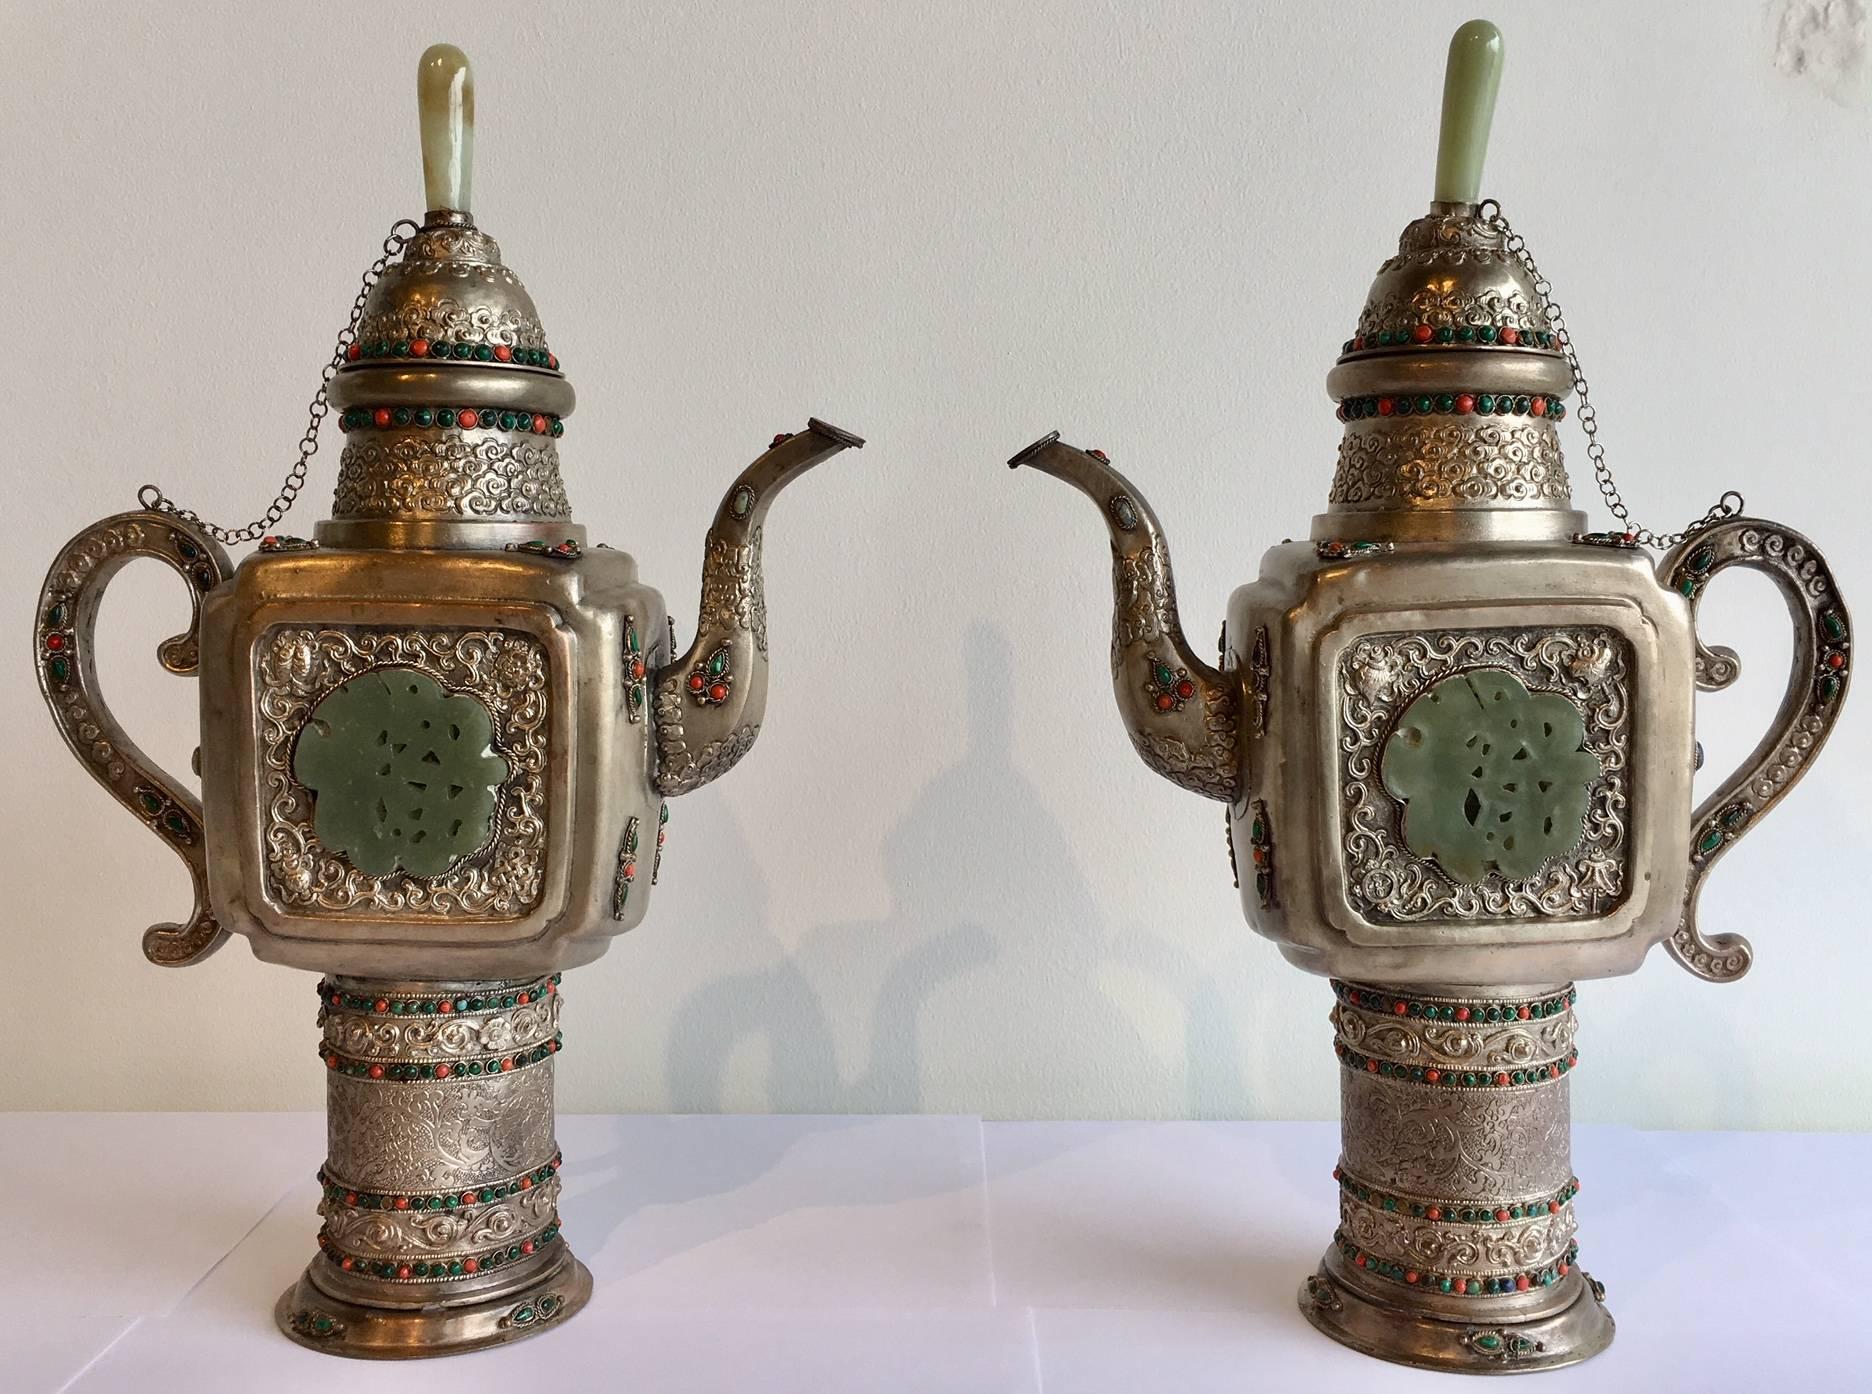 This teapot is made of silver overlaid on pewter, and adorned in semi-precious stones. 
It is inlaid with turquoise, coral, blue lapis, and green jade. It's Mongolian in style, and features an inlaid central design made of jade. 
Made in the late